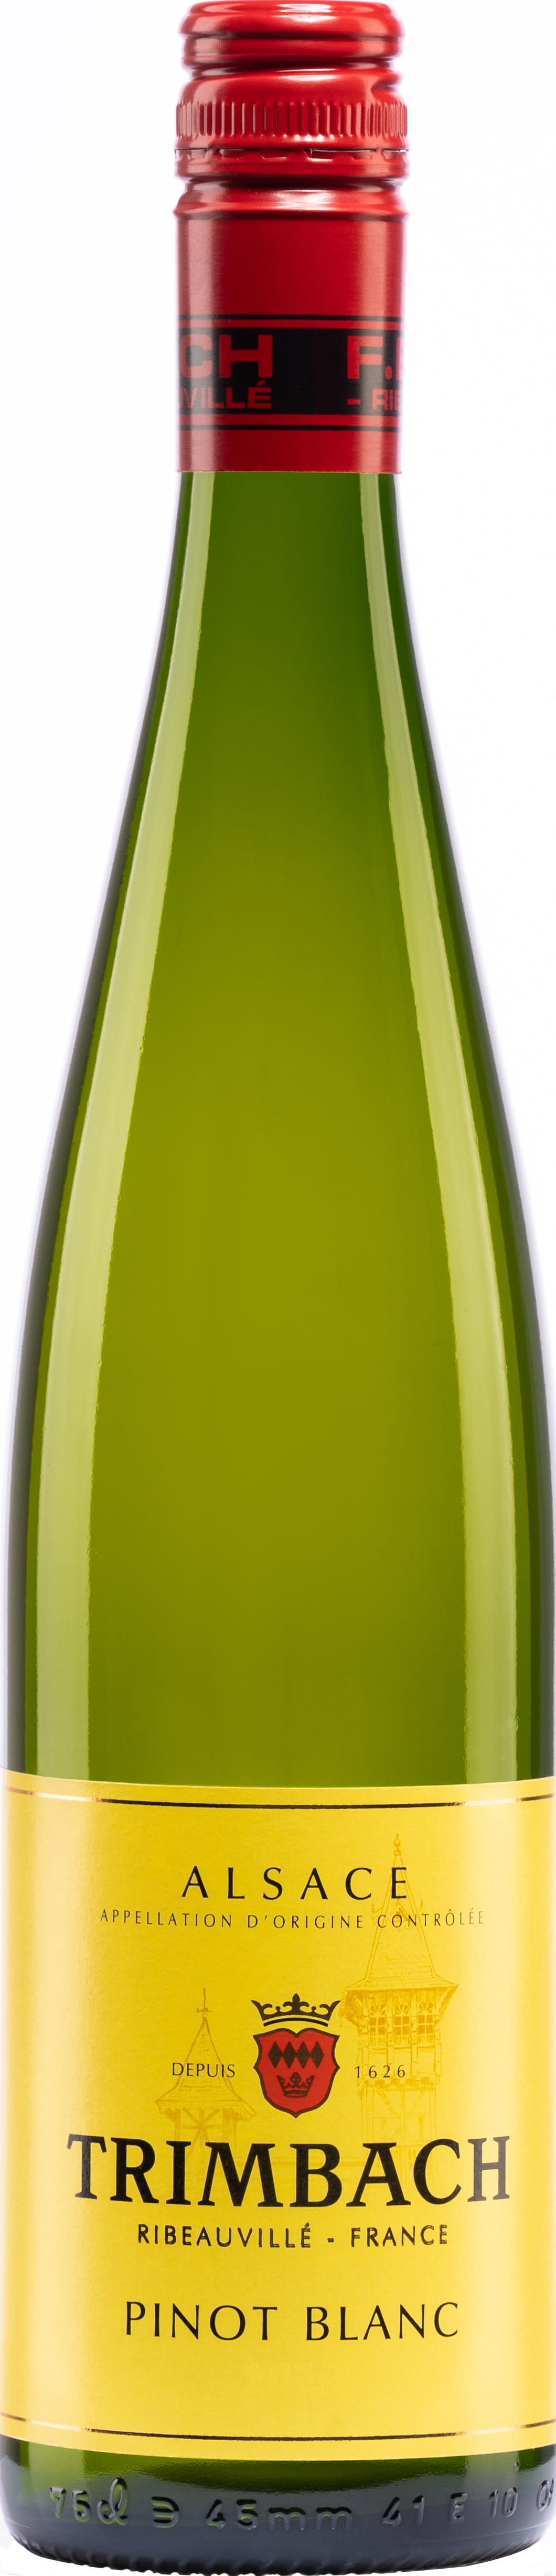 Trimbach Pinot Blanc 2021 75cl - Buy Trimbach Wines from GREAT WINES DIRECT wine shop